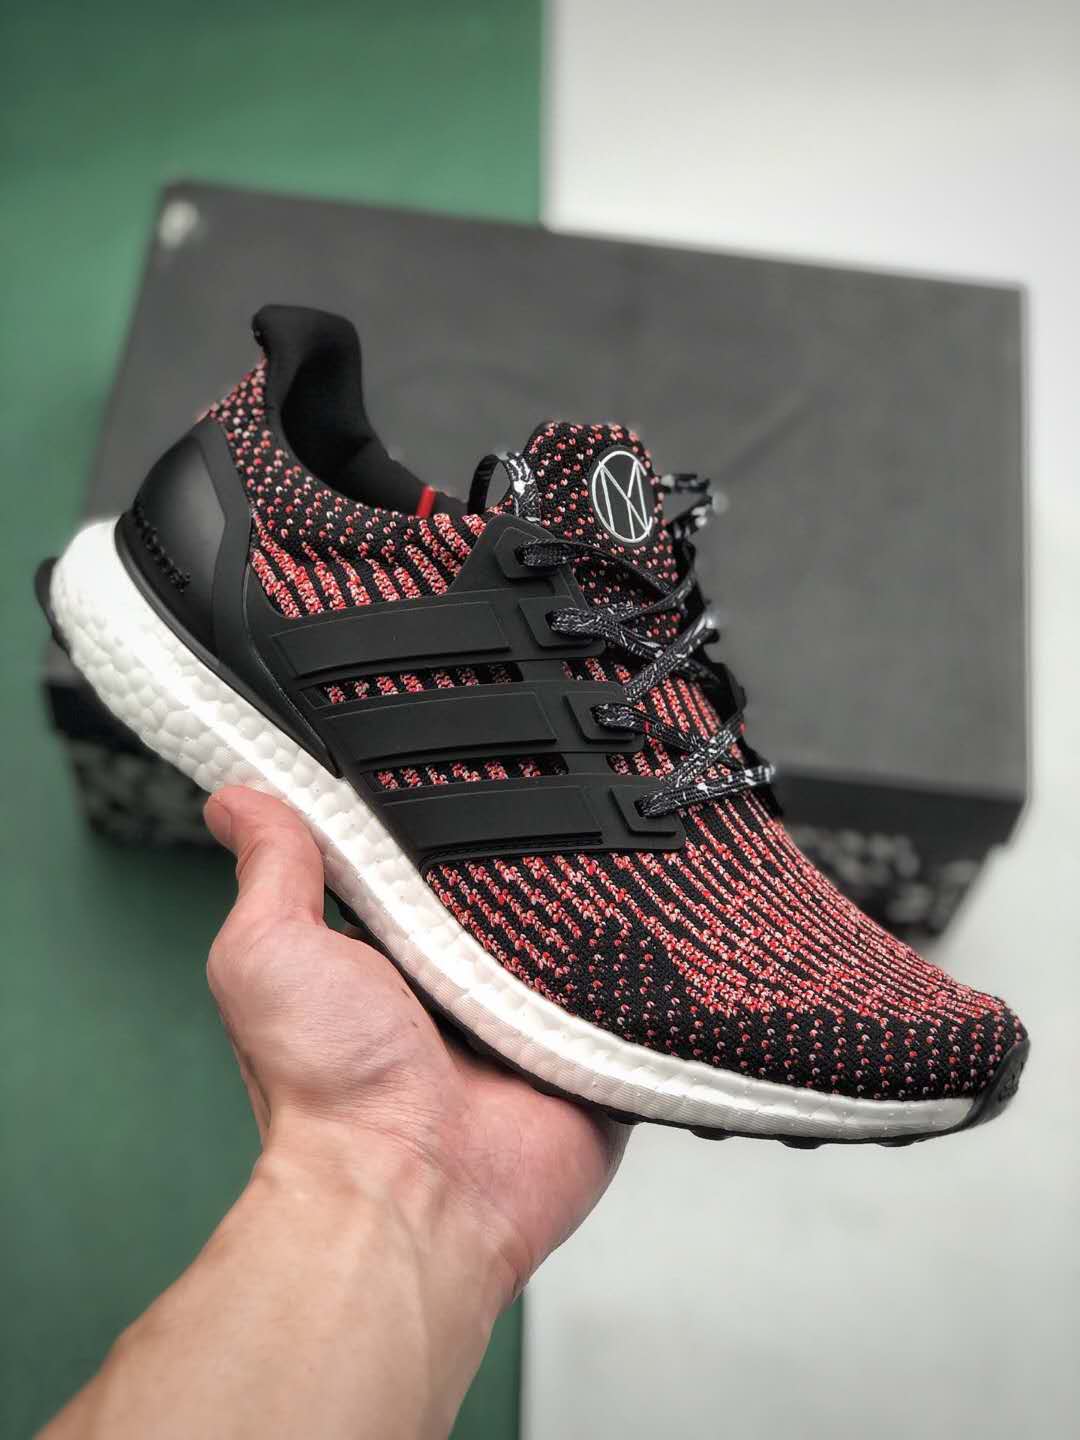 Adidas UltraBoost 3.0 'Chinese New Year' BB3521 - Limited Edition Boost Sneaker